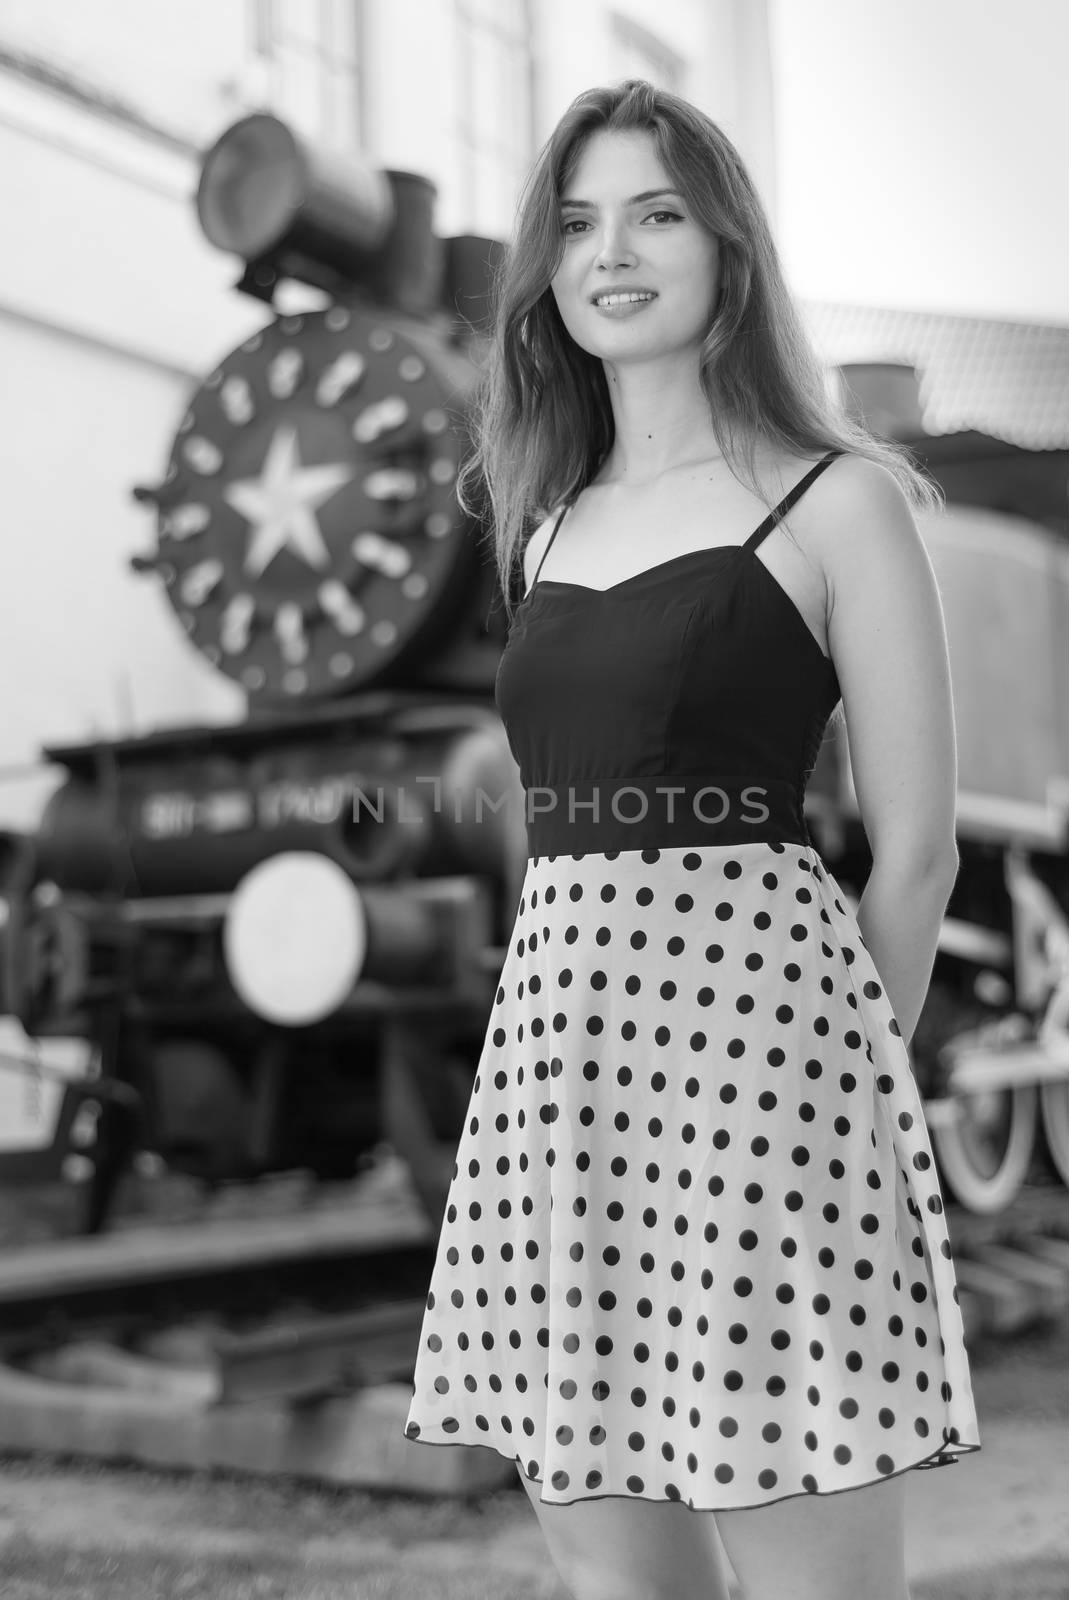 Beautiful girl in a white-black dress with polka dots.